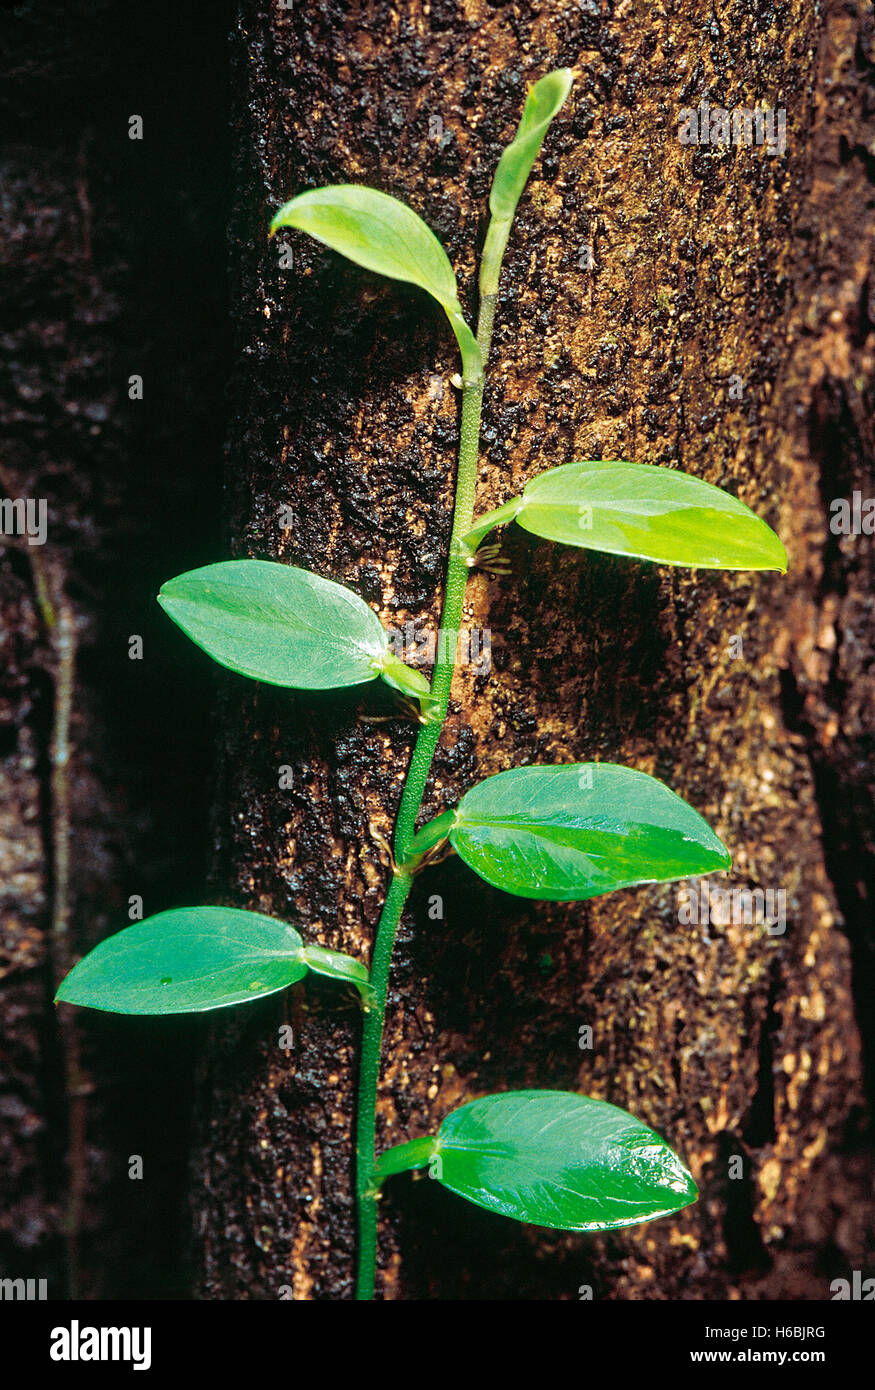 Pothos Scandens. Family: Araceae. A climber which clings to the trunks of trees with tiny roots. Stock Photo